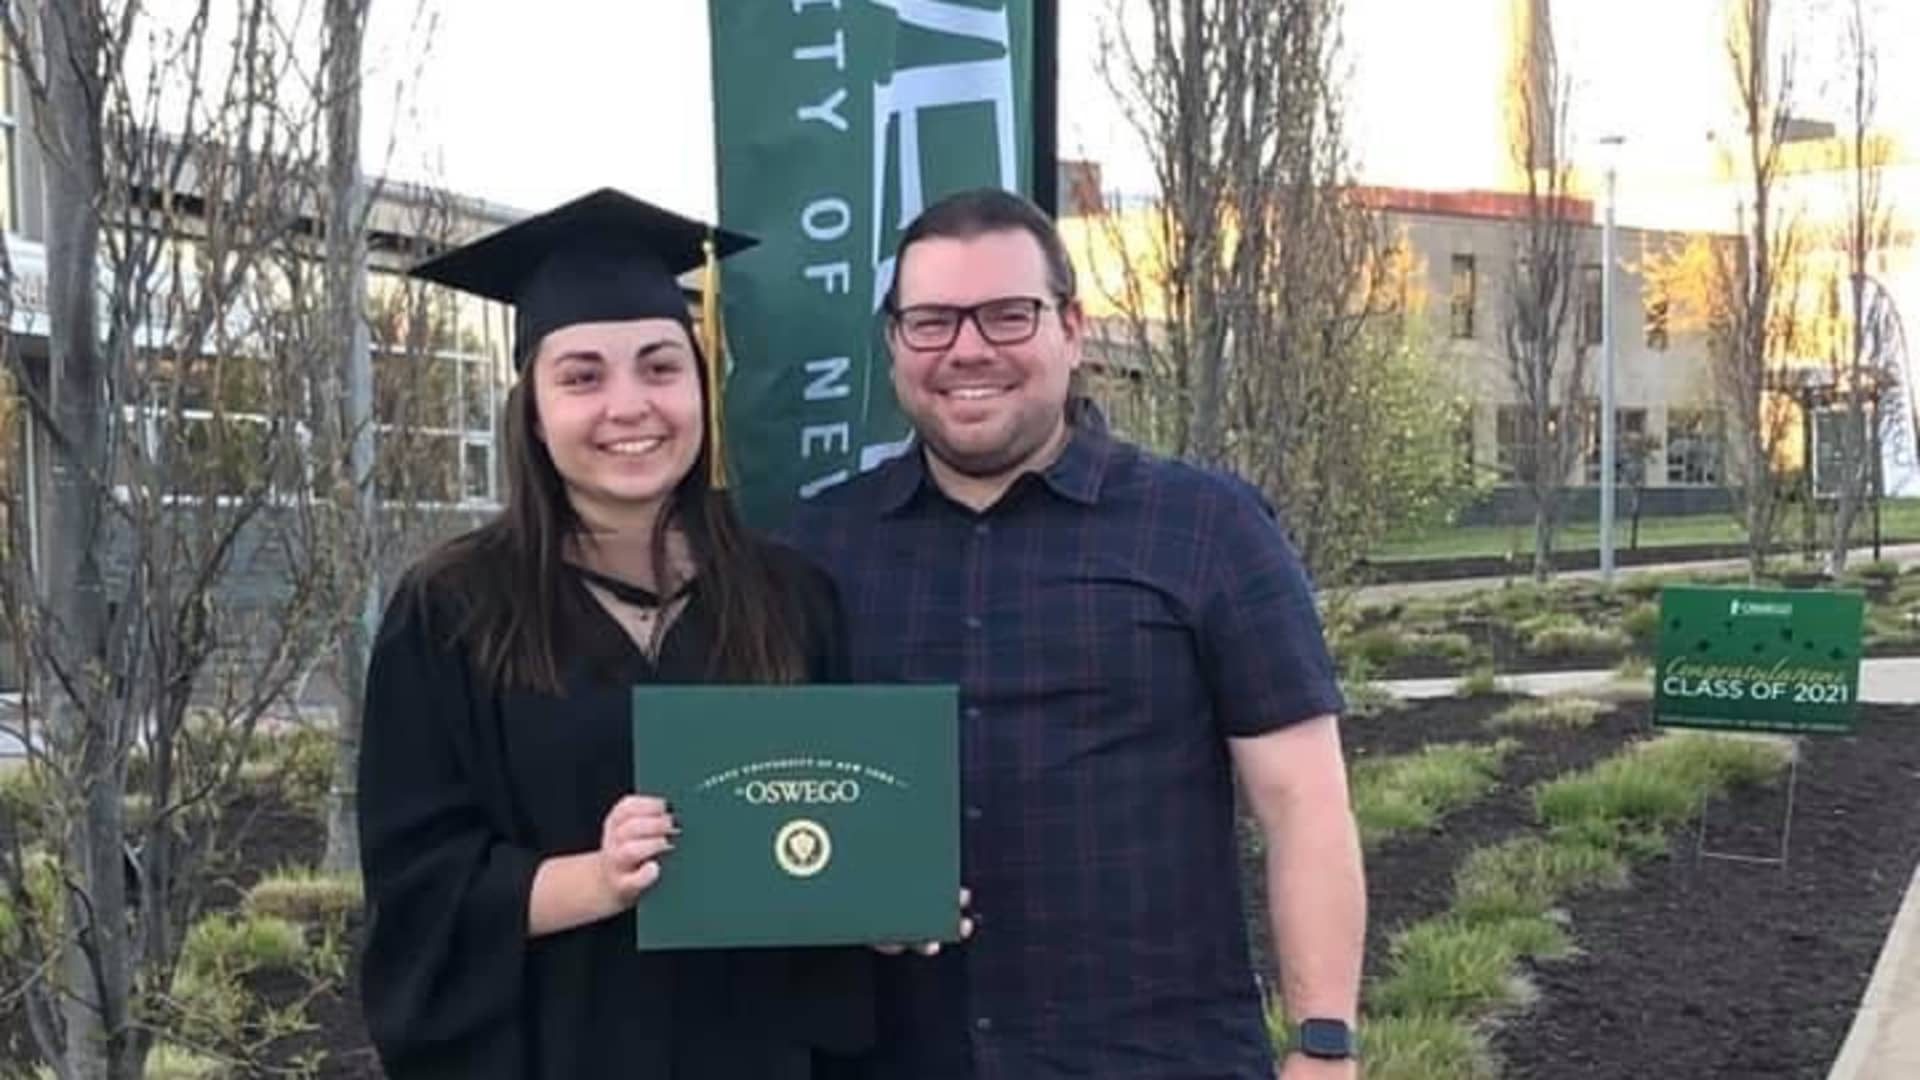 Kelsey DiCarlo and Michael Mancuso celebrate her graduation from business school.